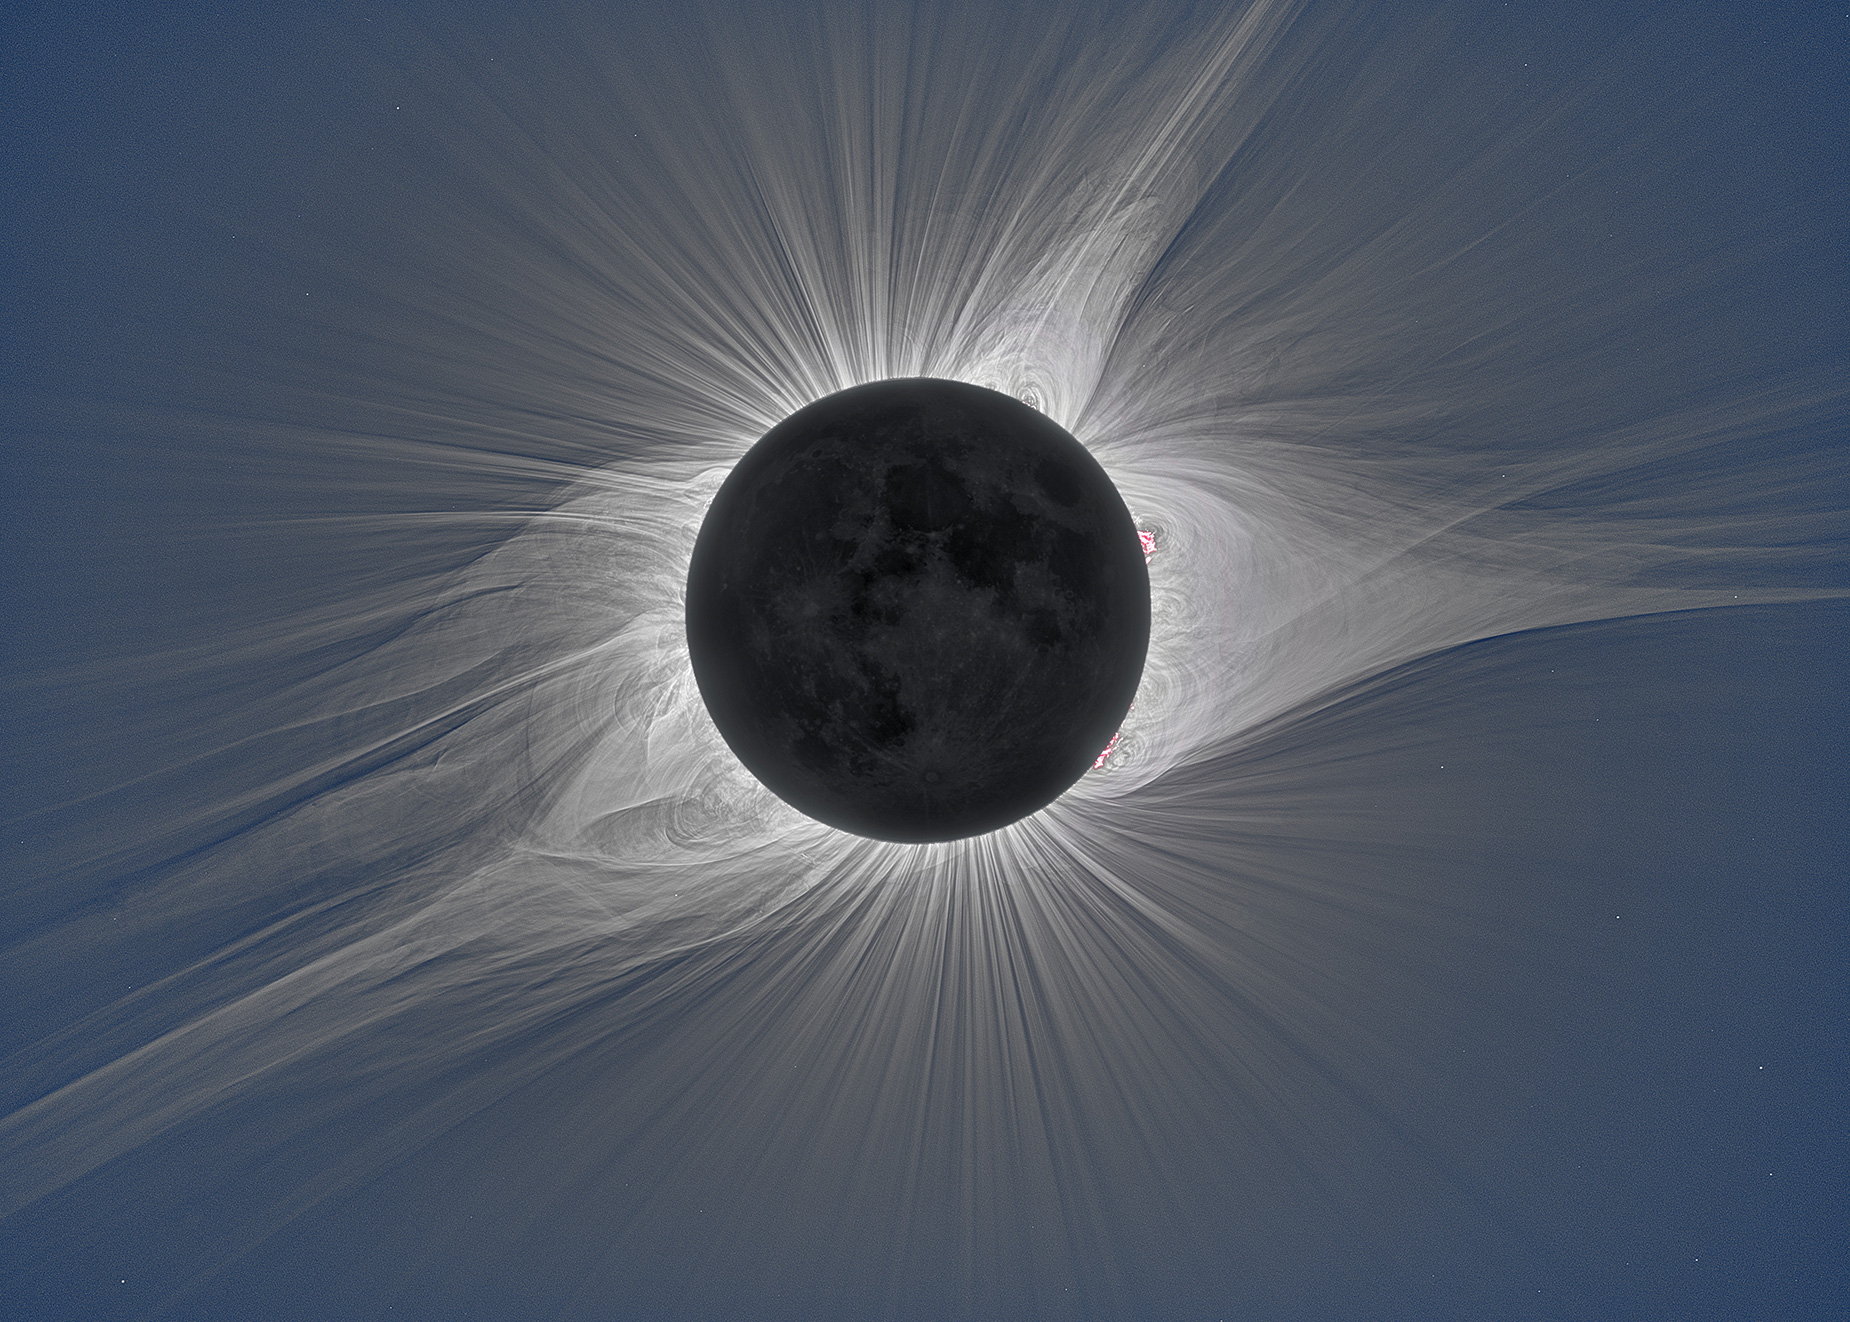 The solar corona glows in visible white light during the total solar eclipse over Mitchell, Oregon, on August 21, 2017, from an image taken during an experiment.